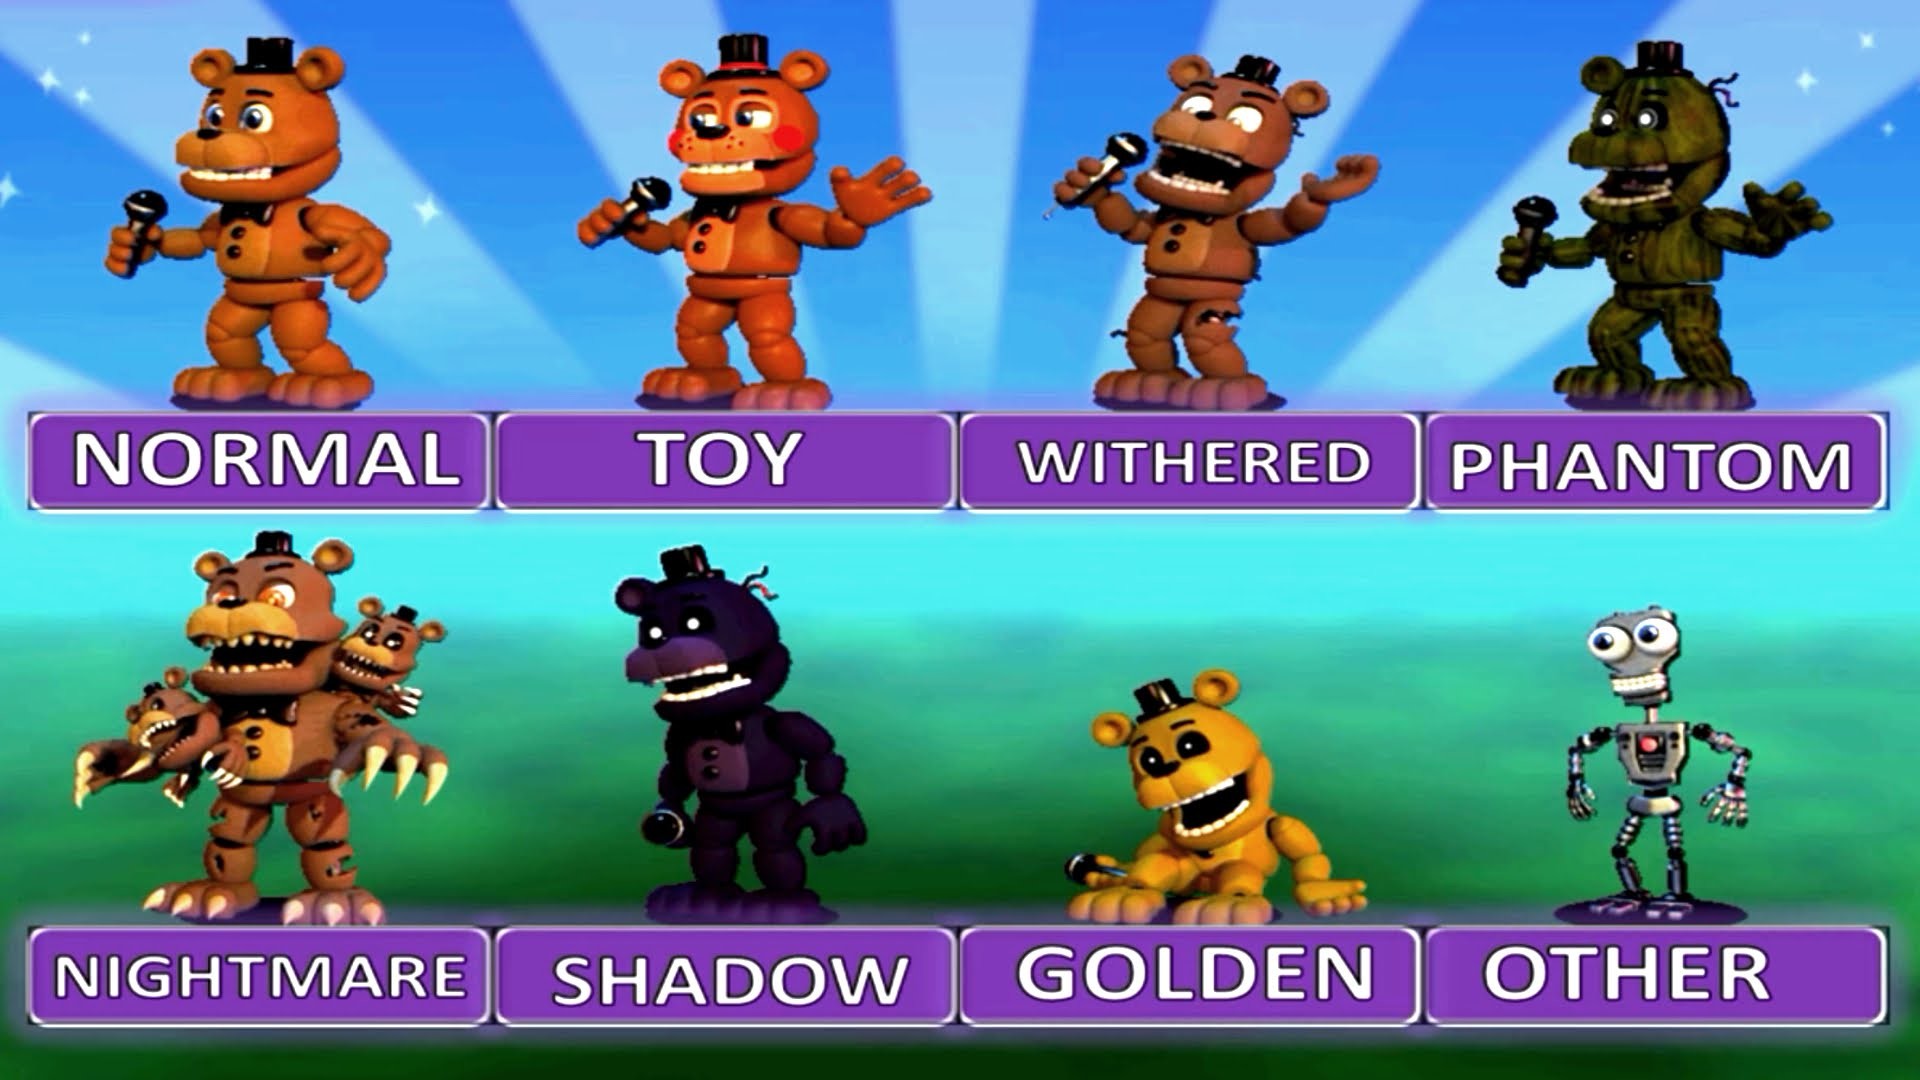 1920x1080 Five Nights at Freddy's World EXTRA MENU "All Characters" | FNAF Fan Games  | IULITM - YouTube